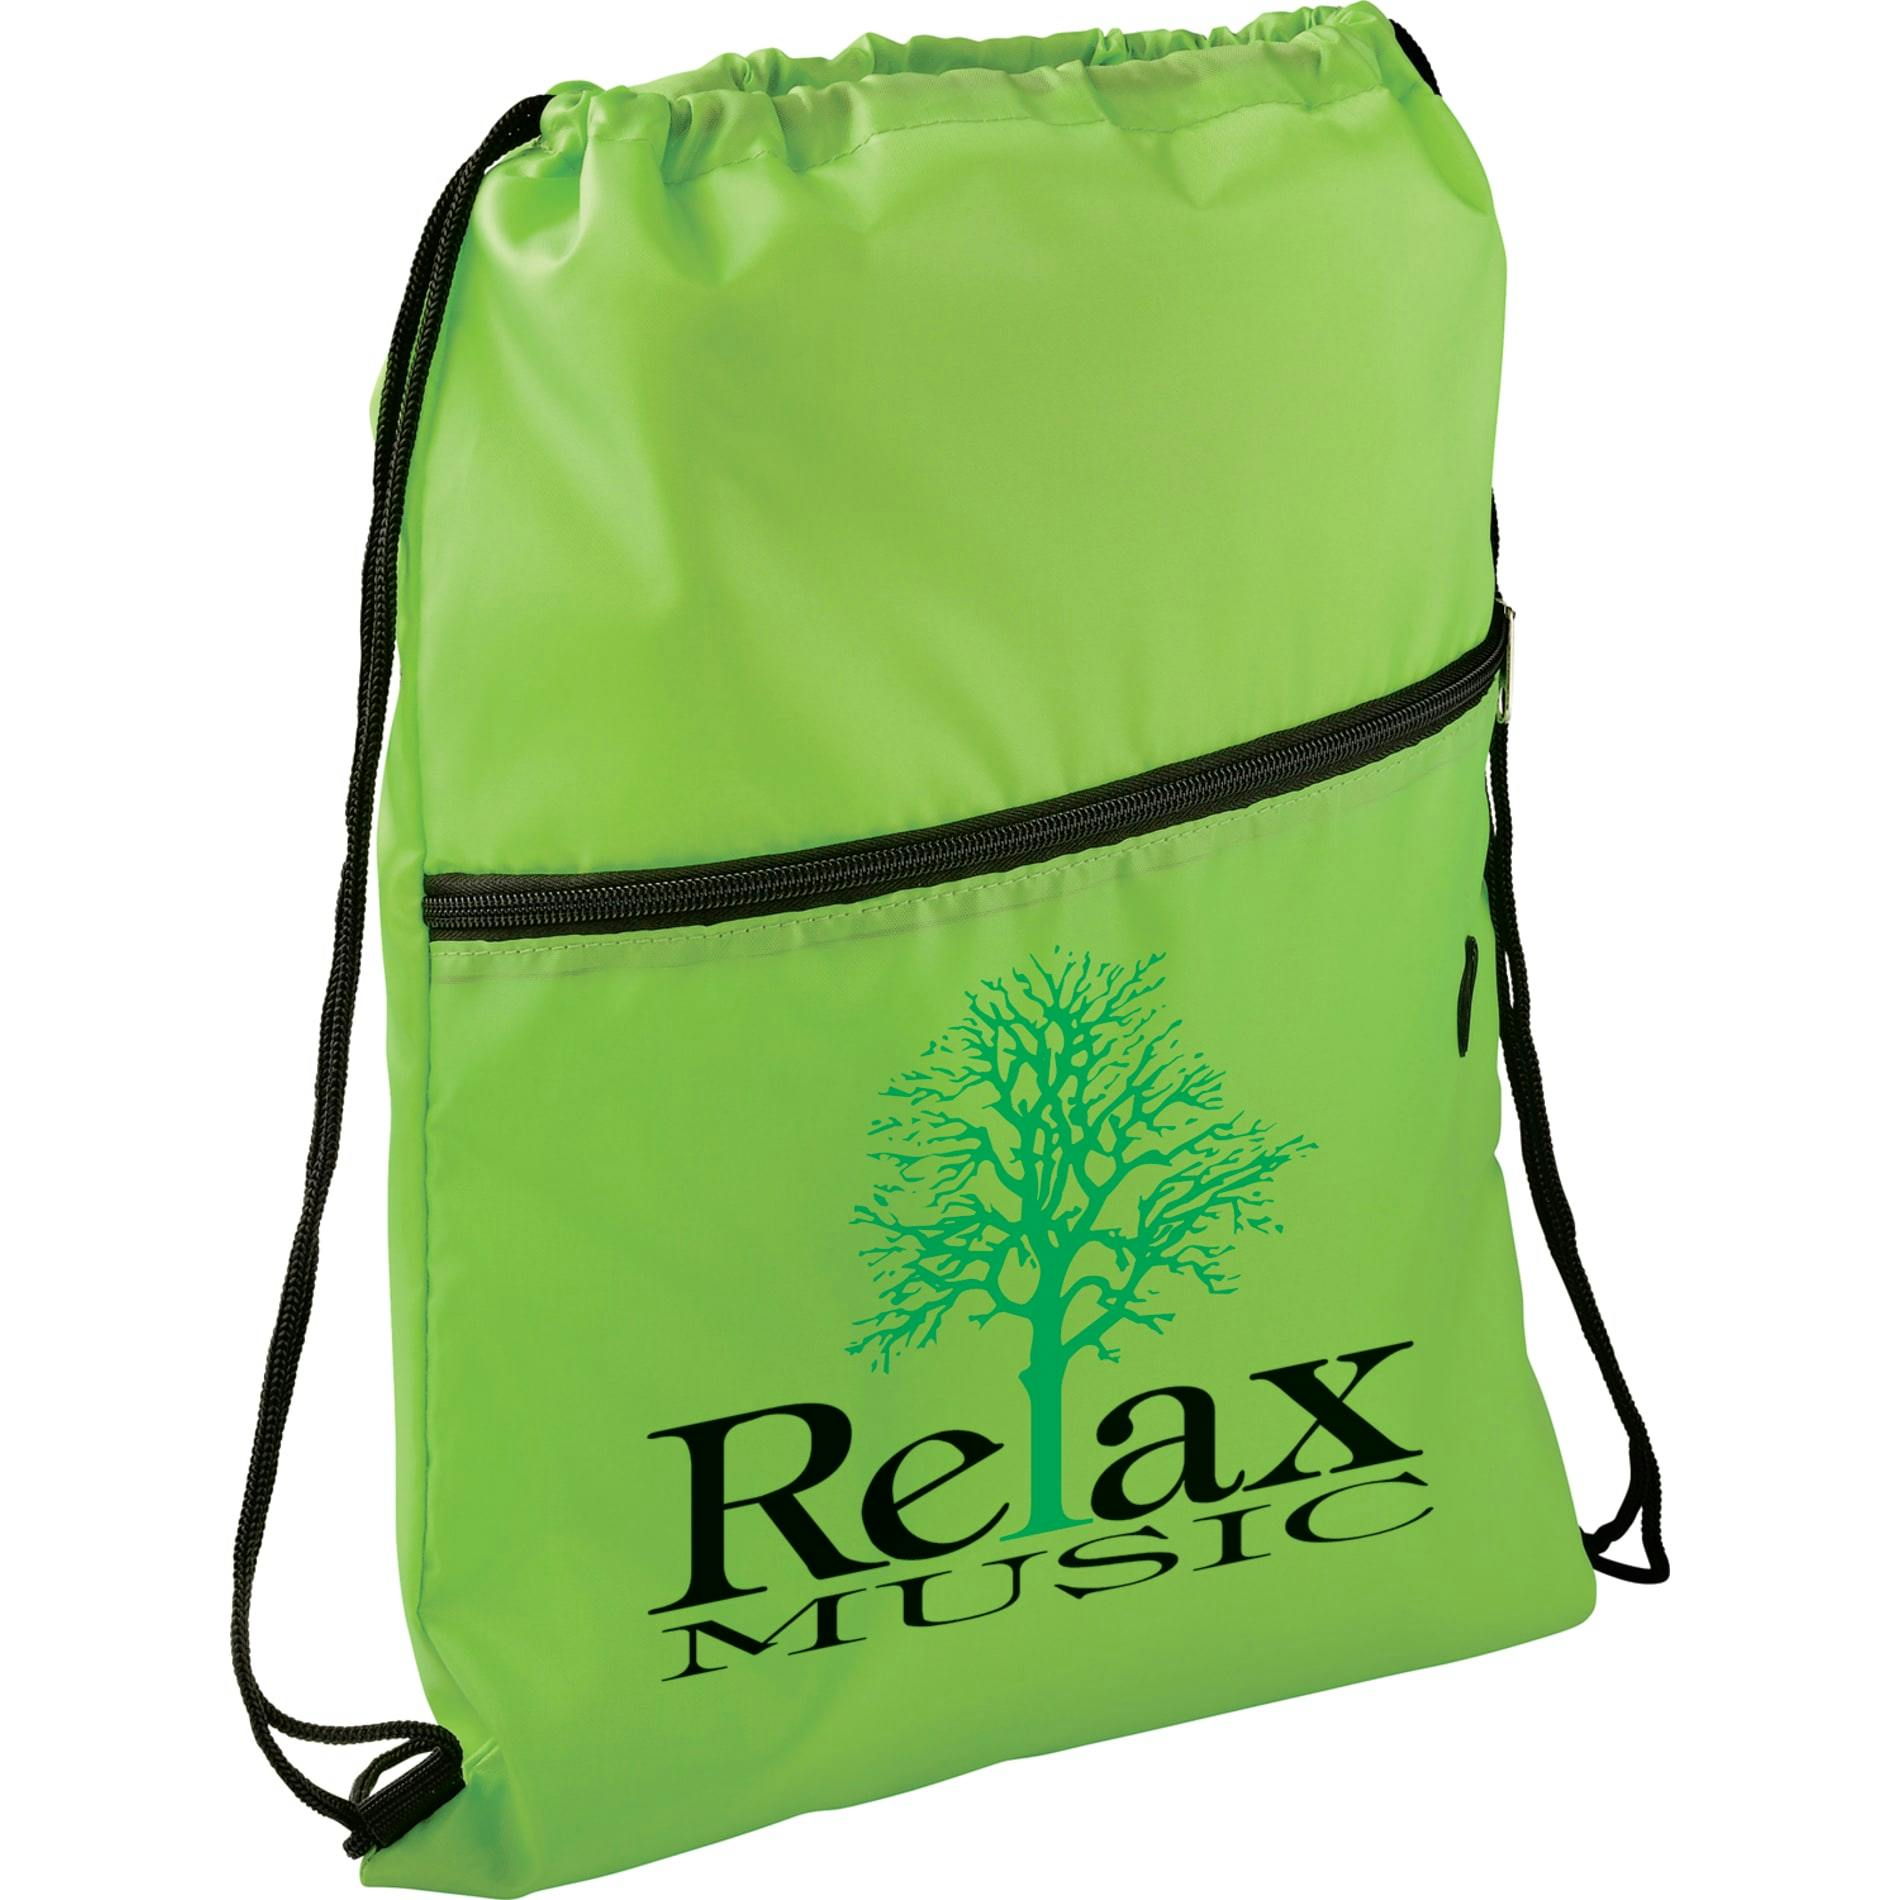 Insulated Zippered Drawstring Bag - additional Image 4